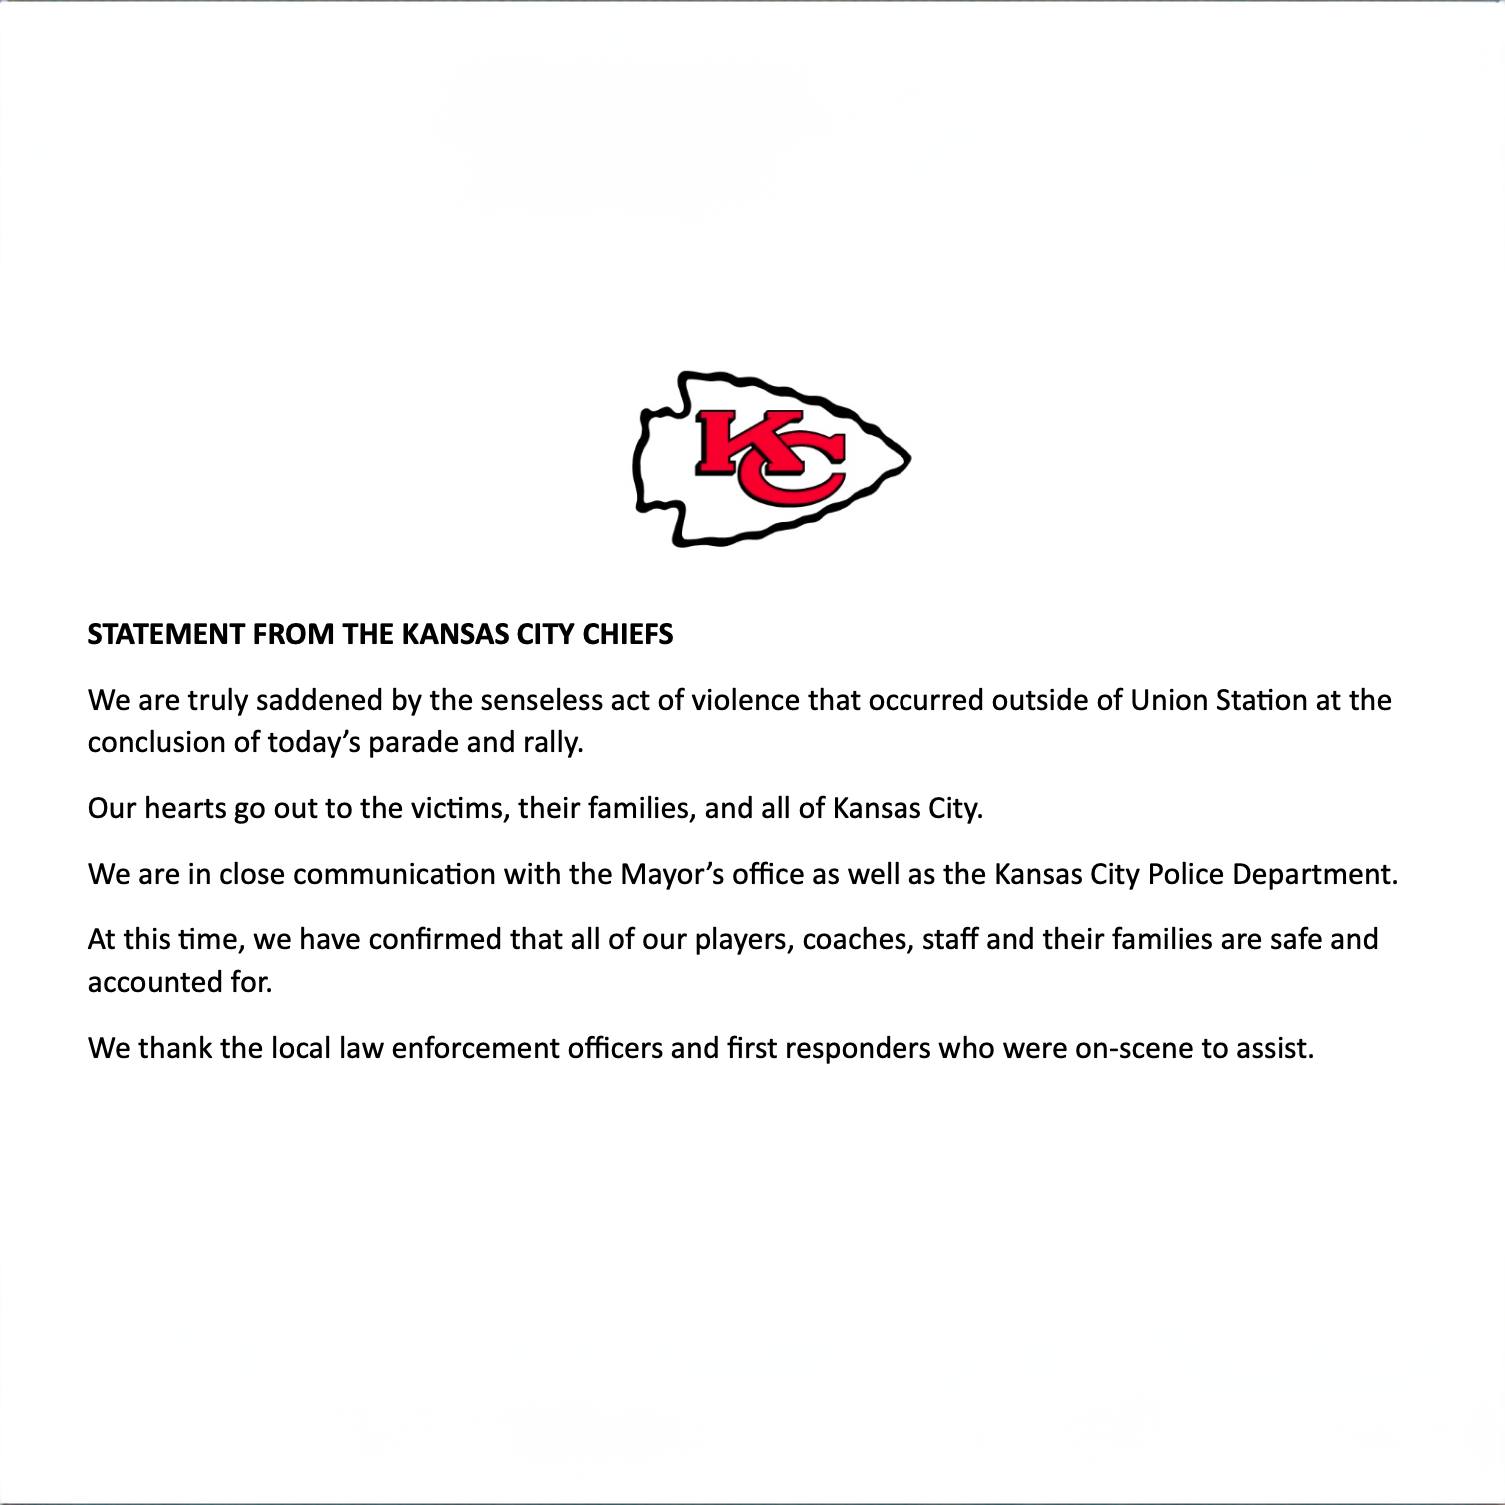 The Kansas City Chiefs and players such as Travis Kelce released statements about the Super Bowl parade shooting that occurred in Kansas City on February 14